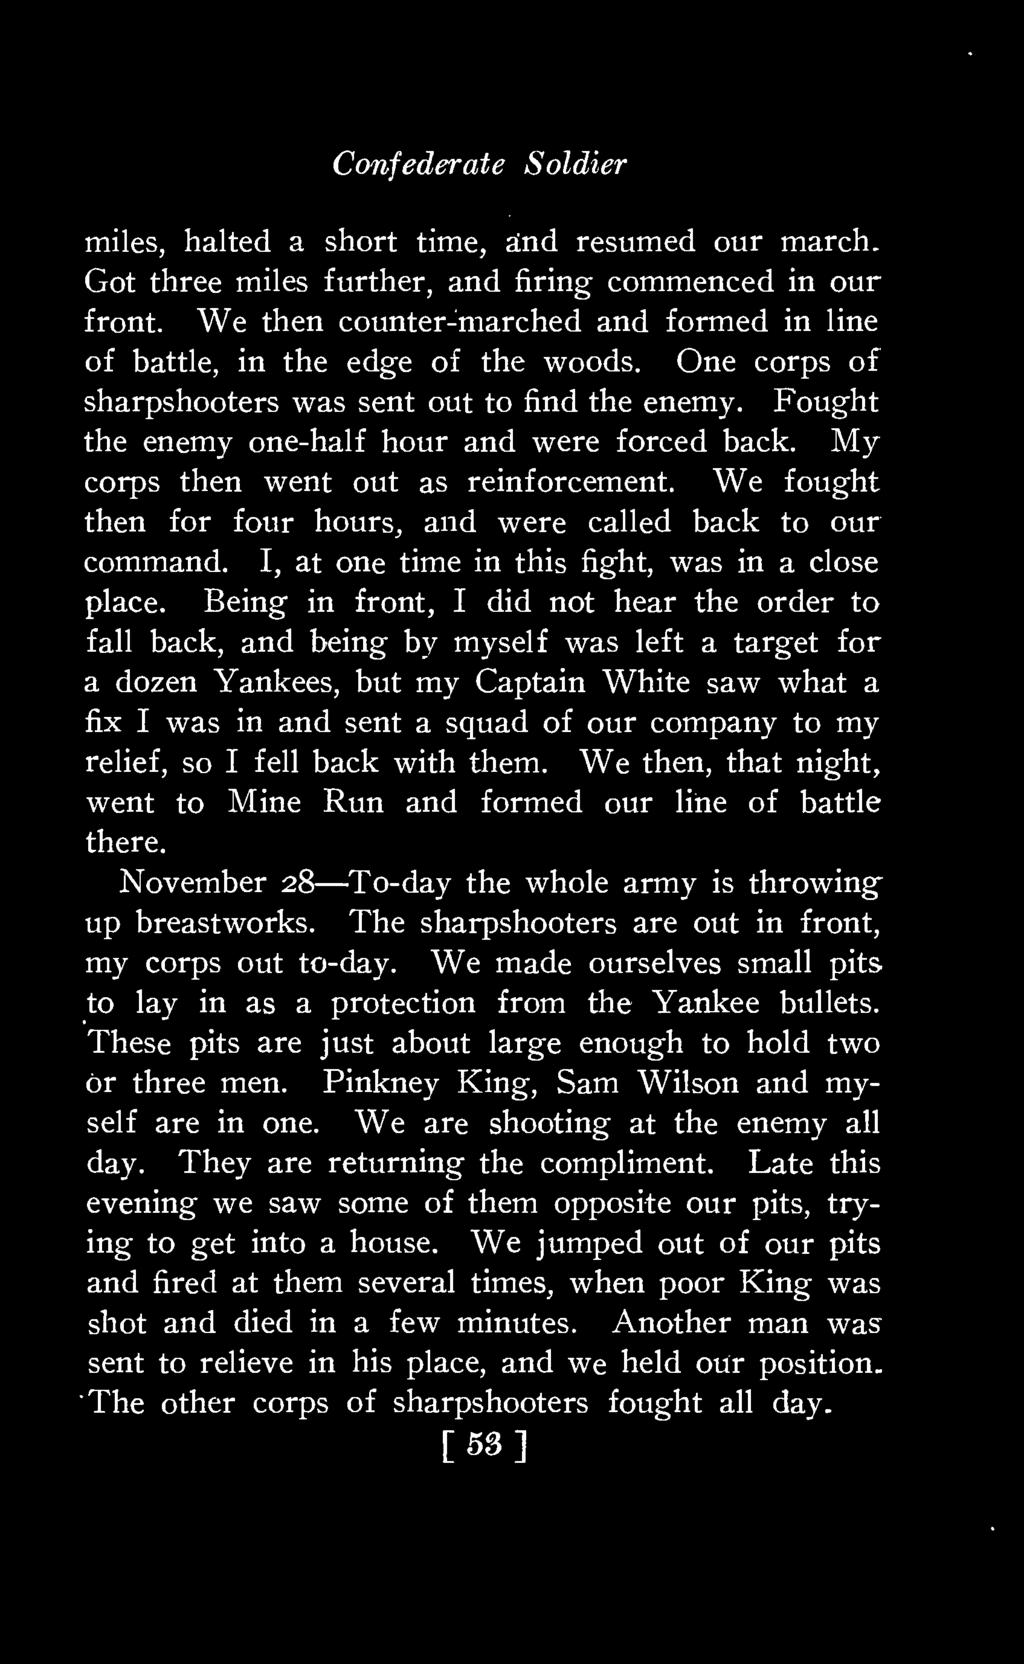 My corps then went out as reinforcement. We fought then for four hours, and were called back to our command. I, at one time in this fight, was in a close place.